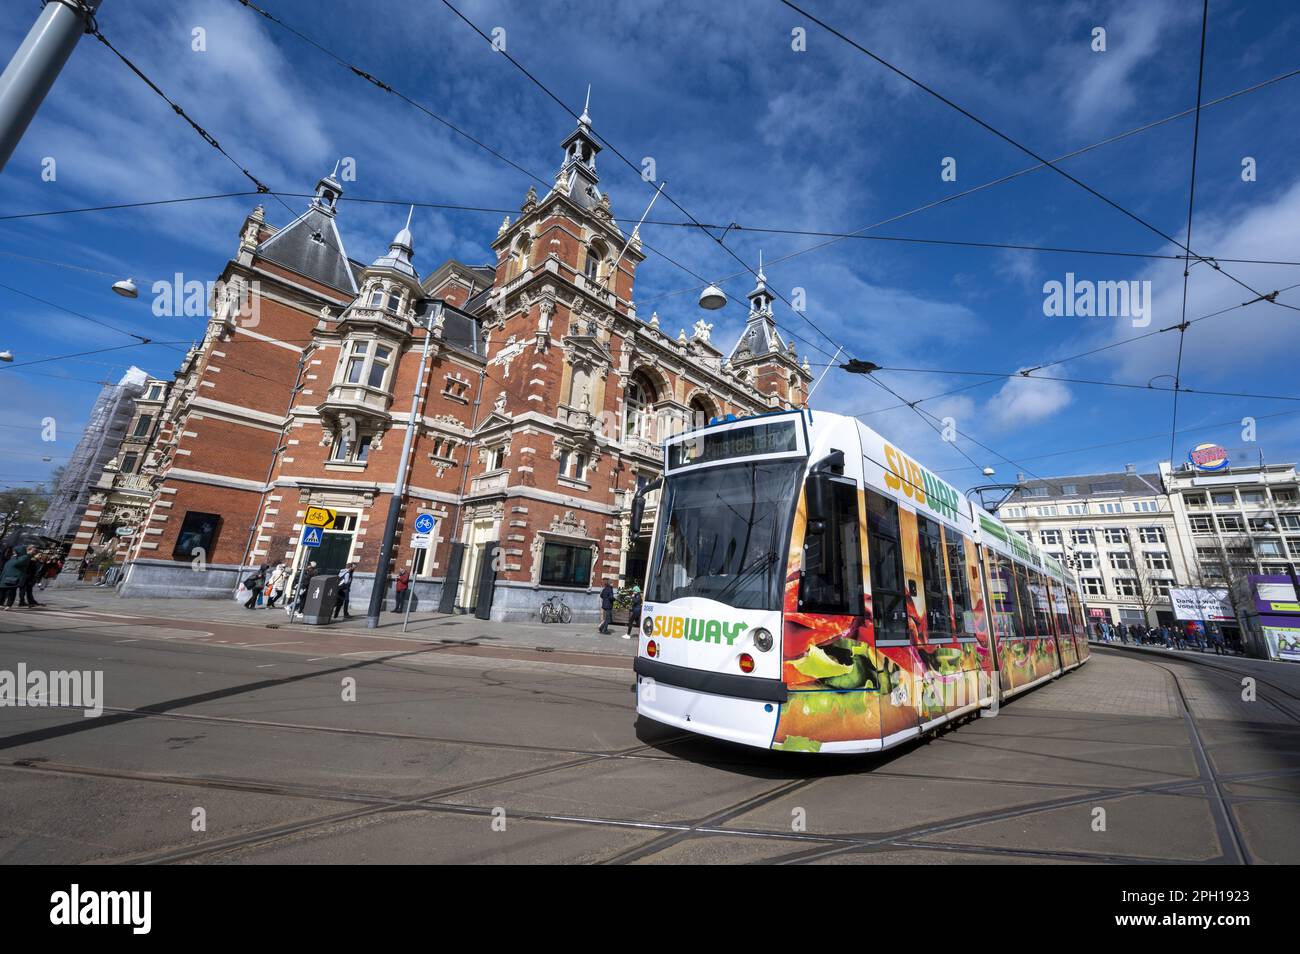 AMSTERDAM - Tram 12 in the center of Amsterdam. Public transport in the capital is being overhauled because the number of travelers has decreased due to the corona crisis. ANP EVERT ELZINGA netherlands out - belgium out Stock Photo